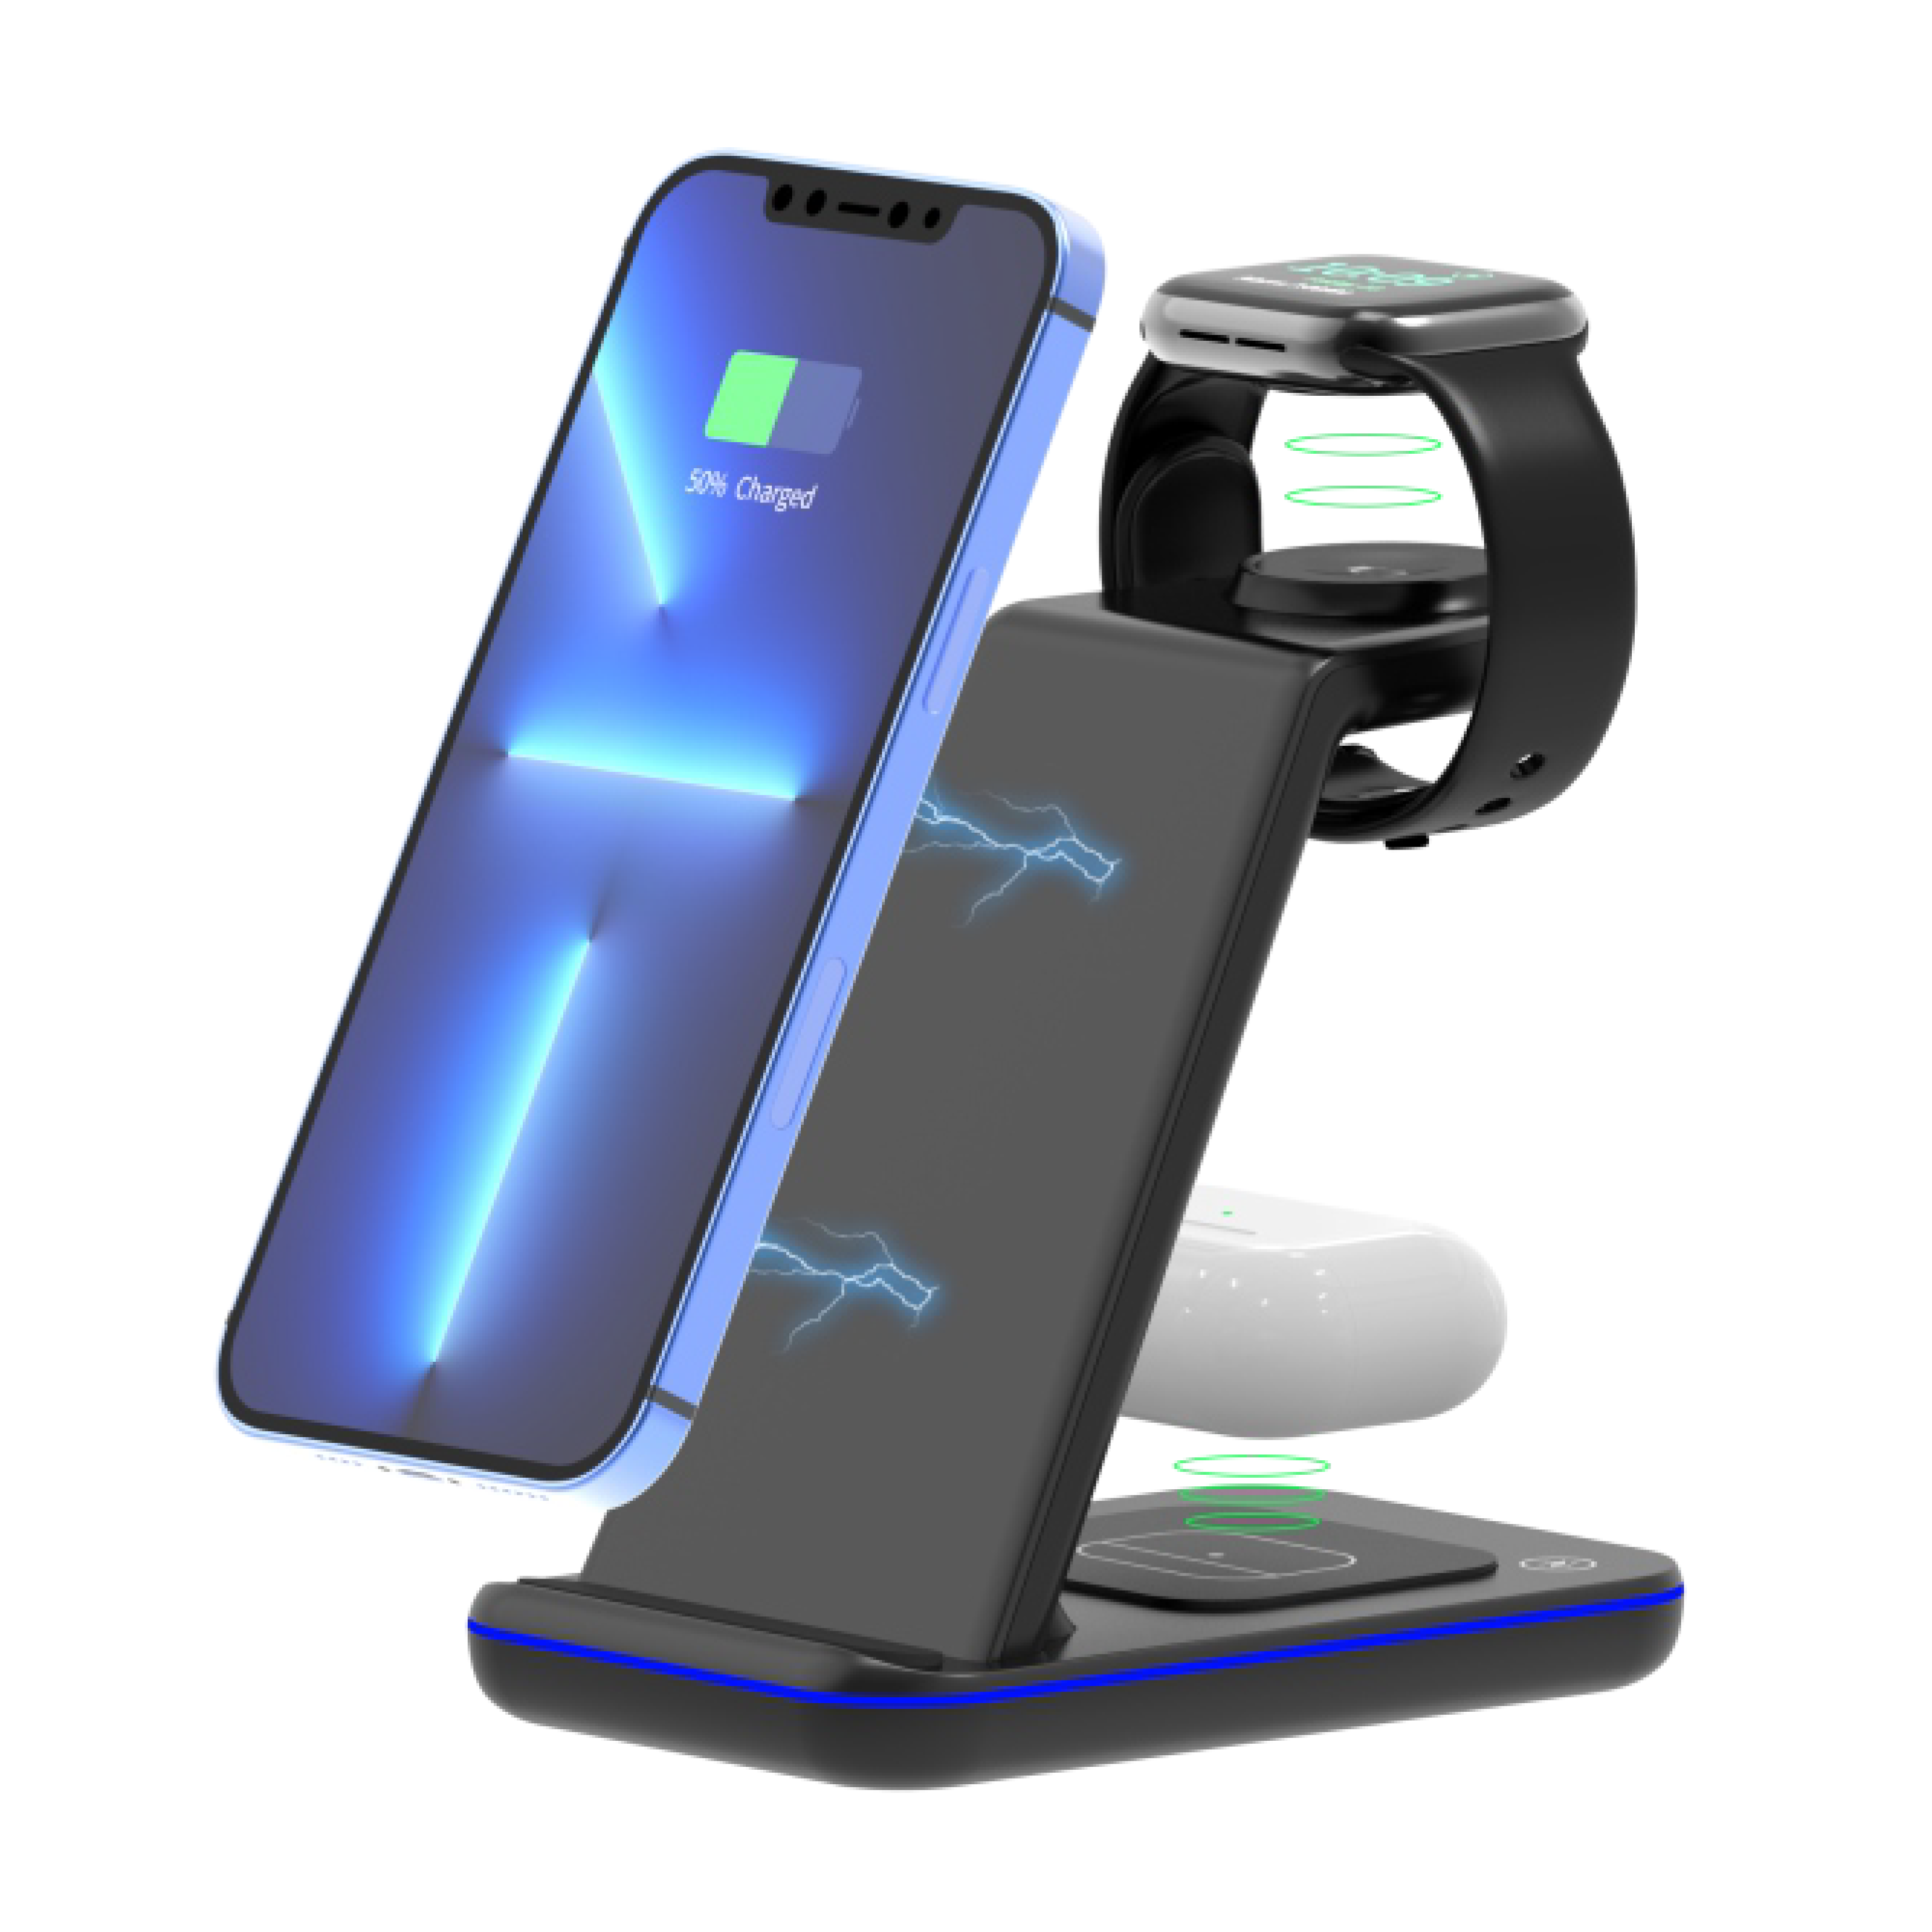 Z8-1 Qi fast charging stand 3 in 1 phone wireless charger